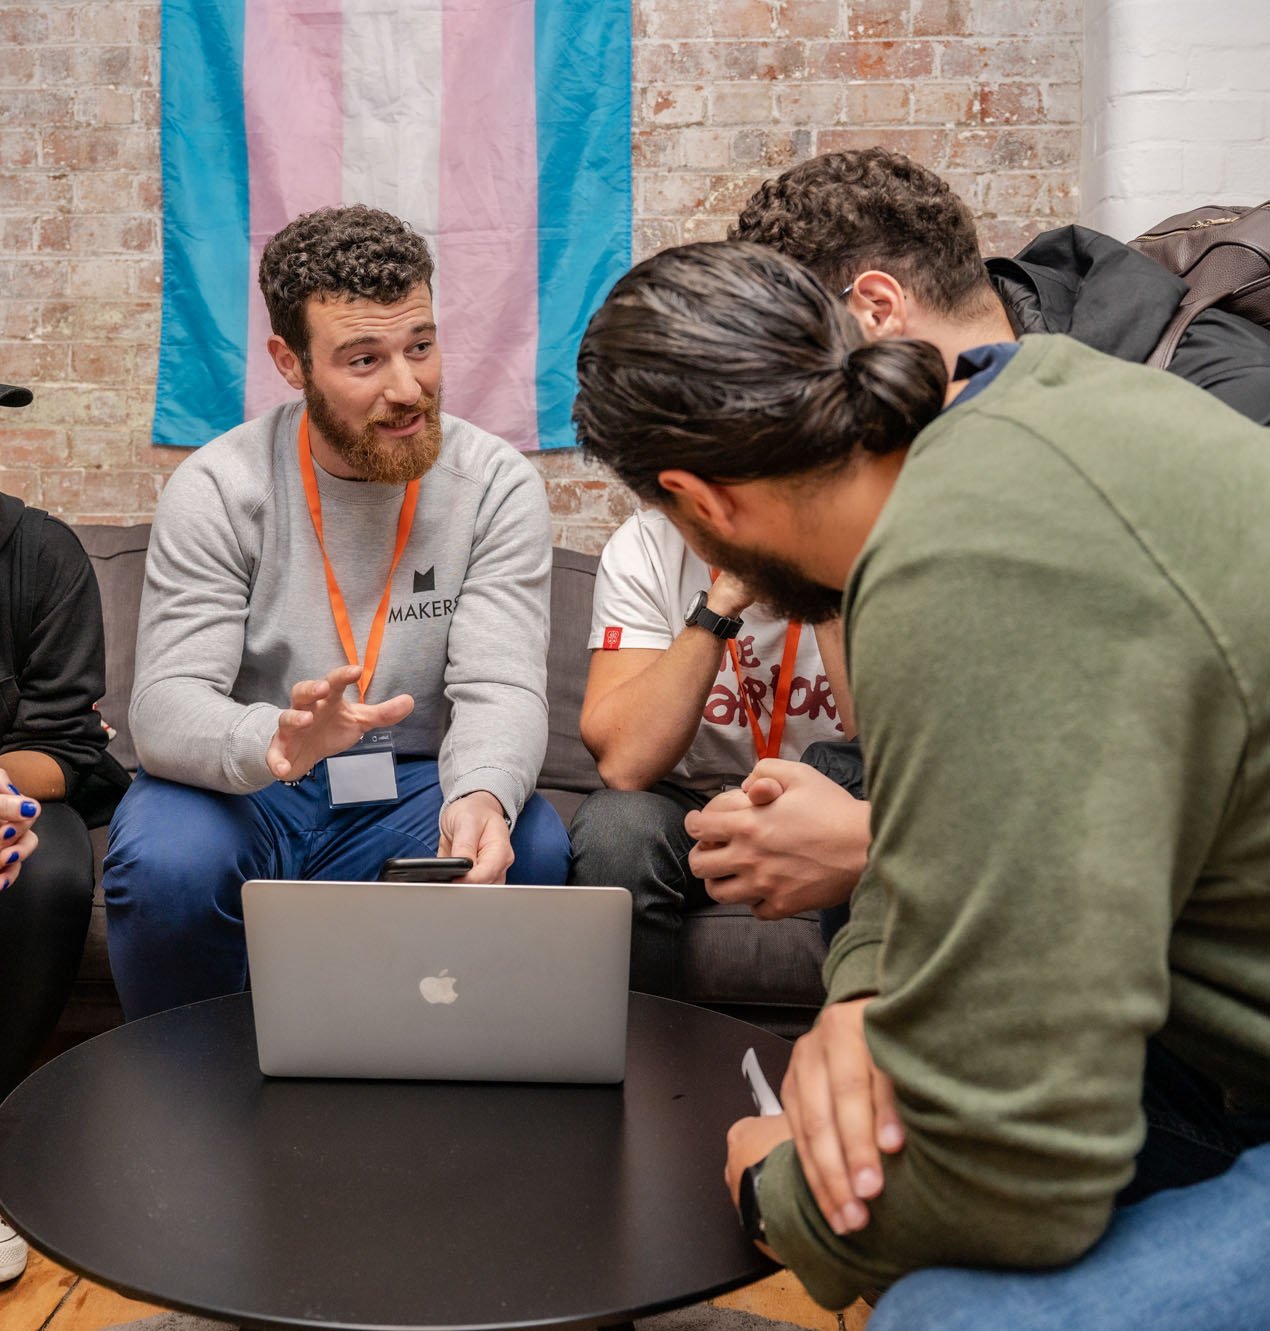 A man with a ponytail looks away from the camera into a huddle of people listening to a tutor with a beard, with a laptop at the centre